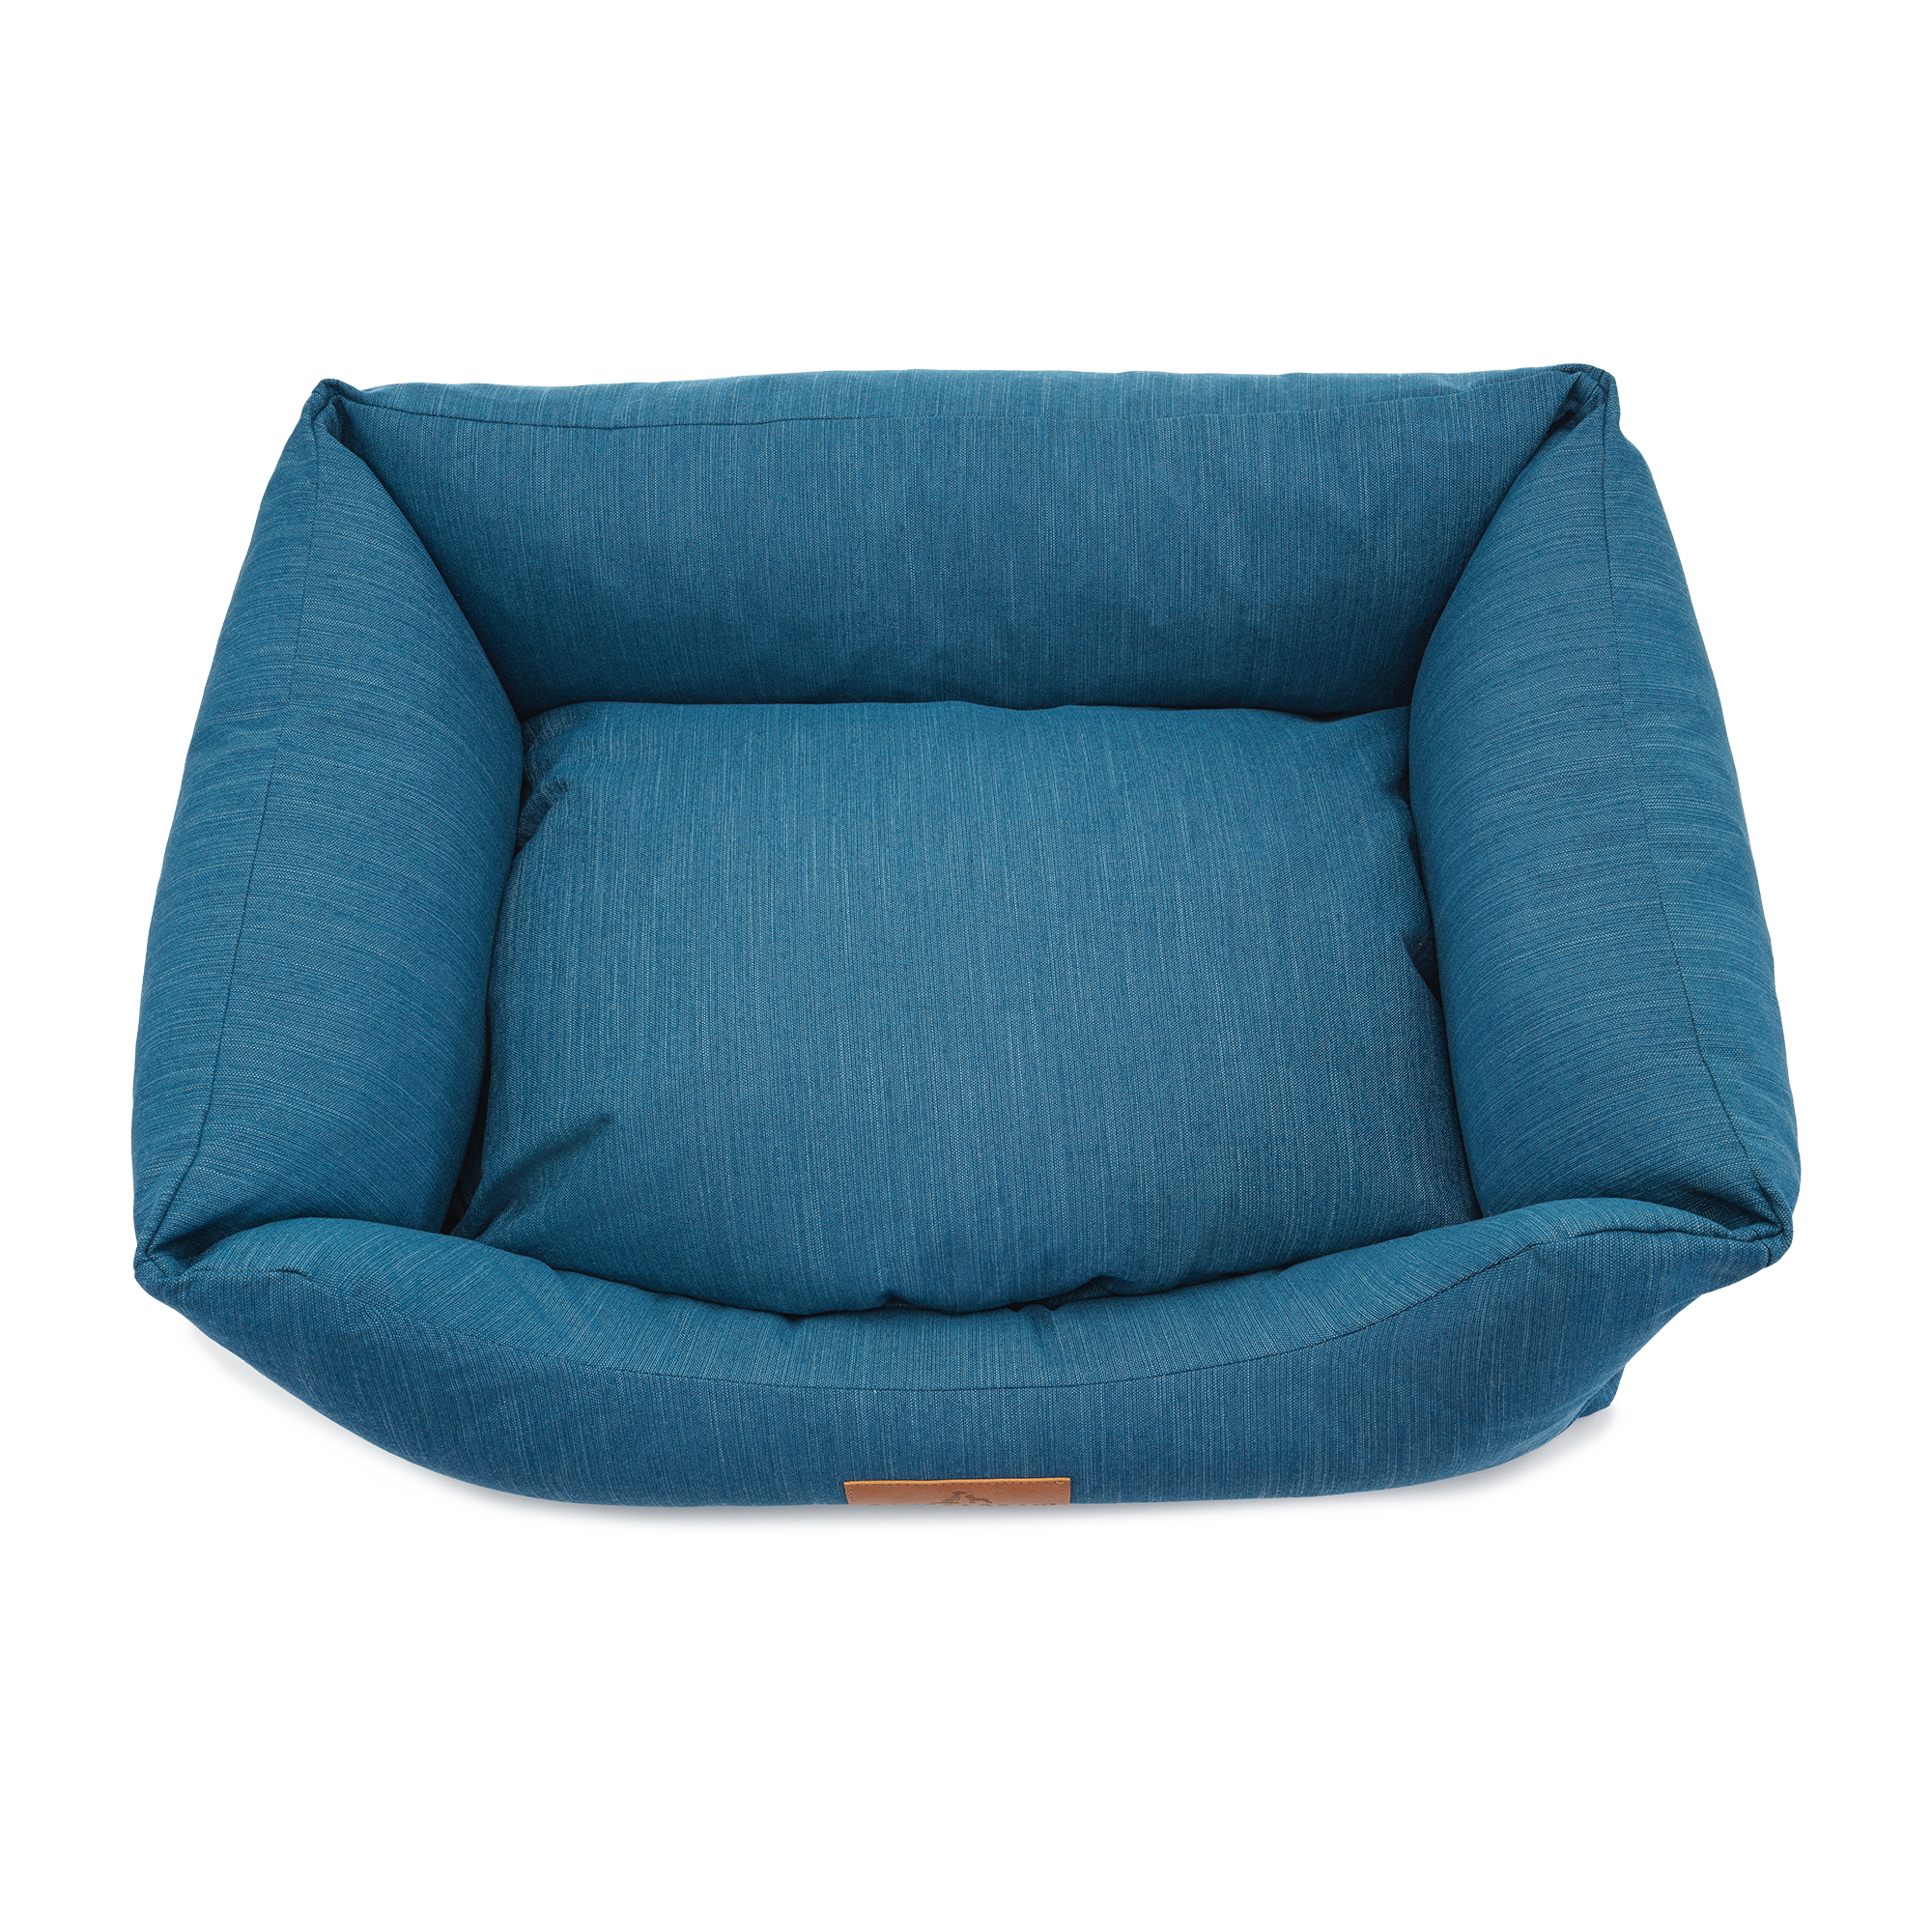 Eco Luxe Orthopaedic Luxury Dog Bed, Teal Blue-Green